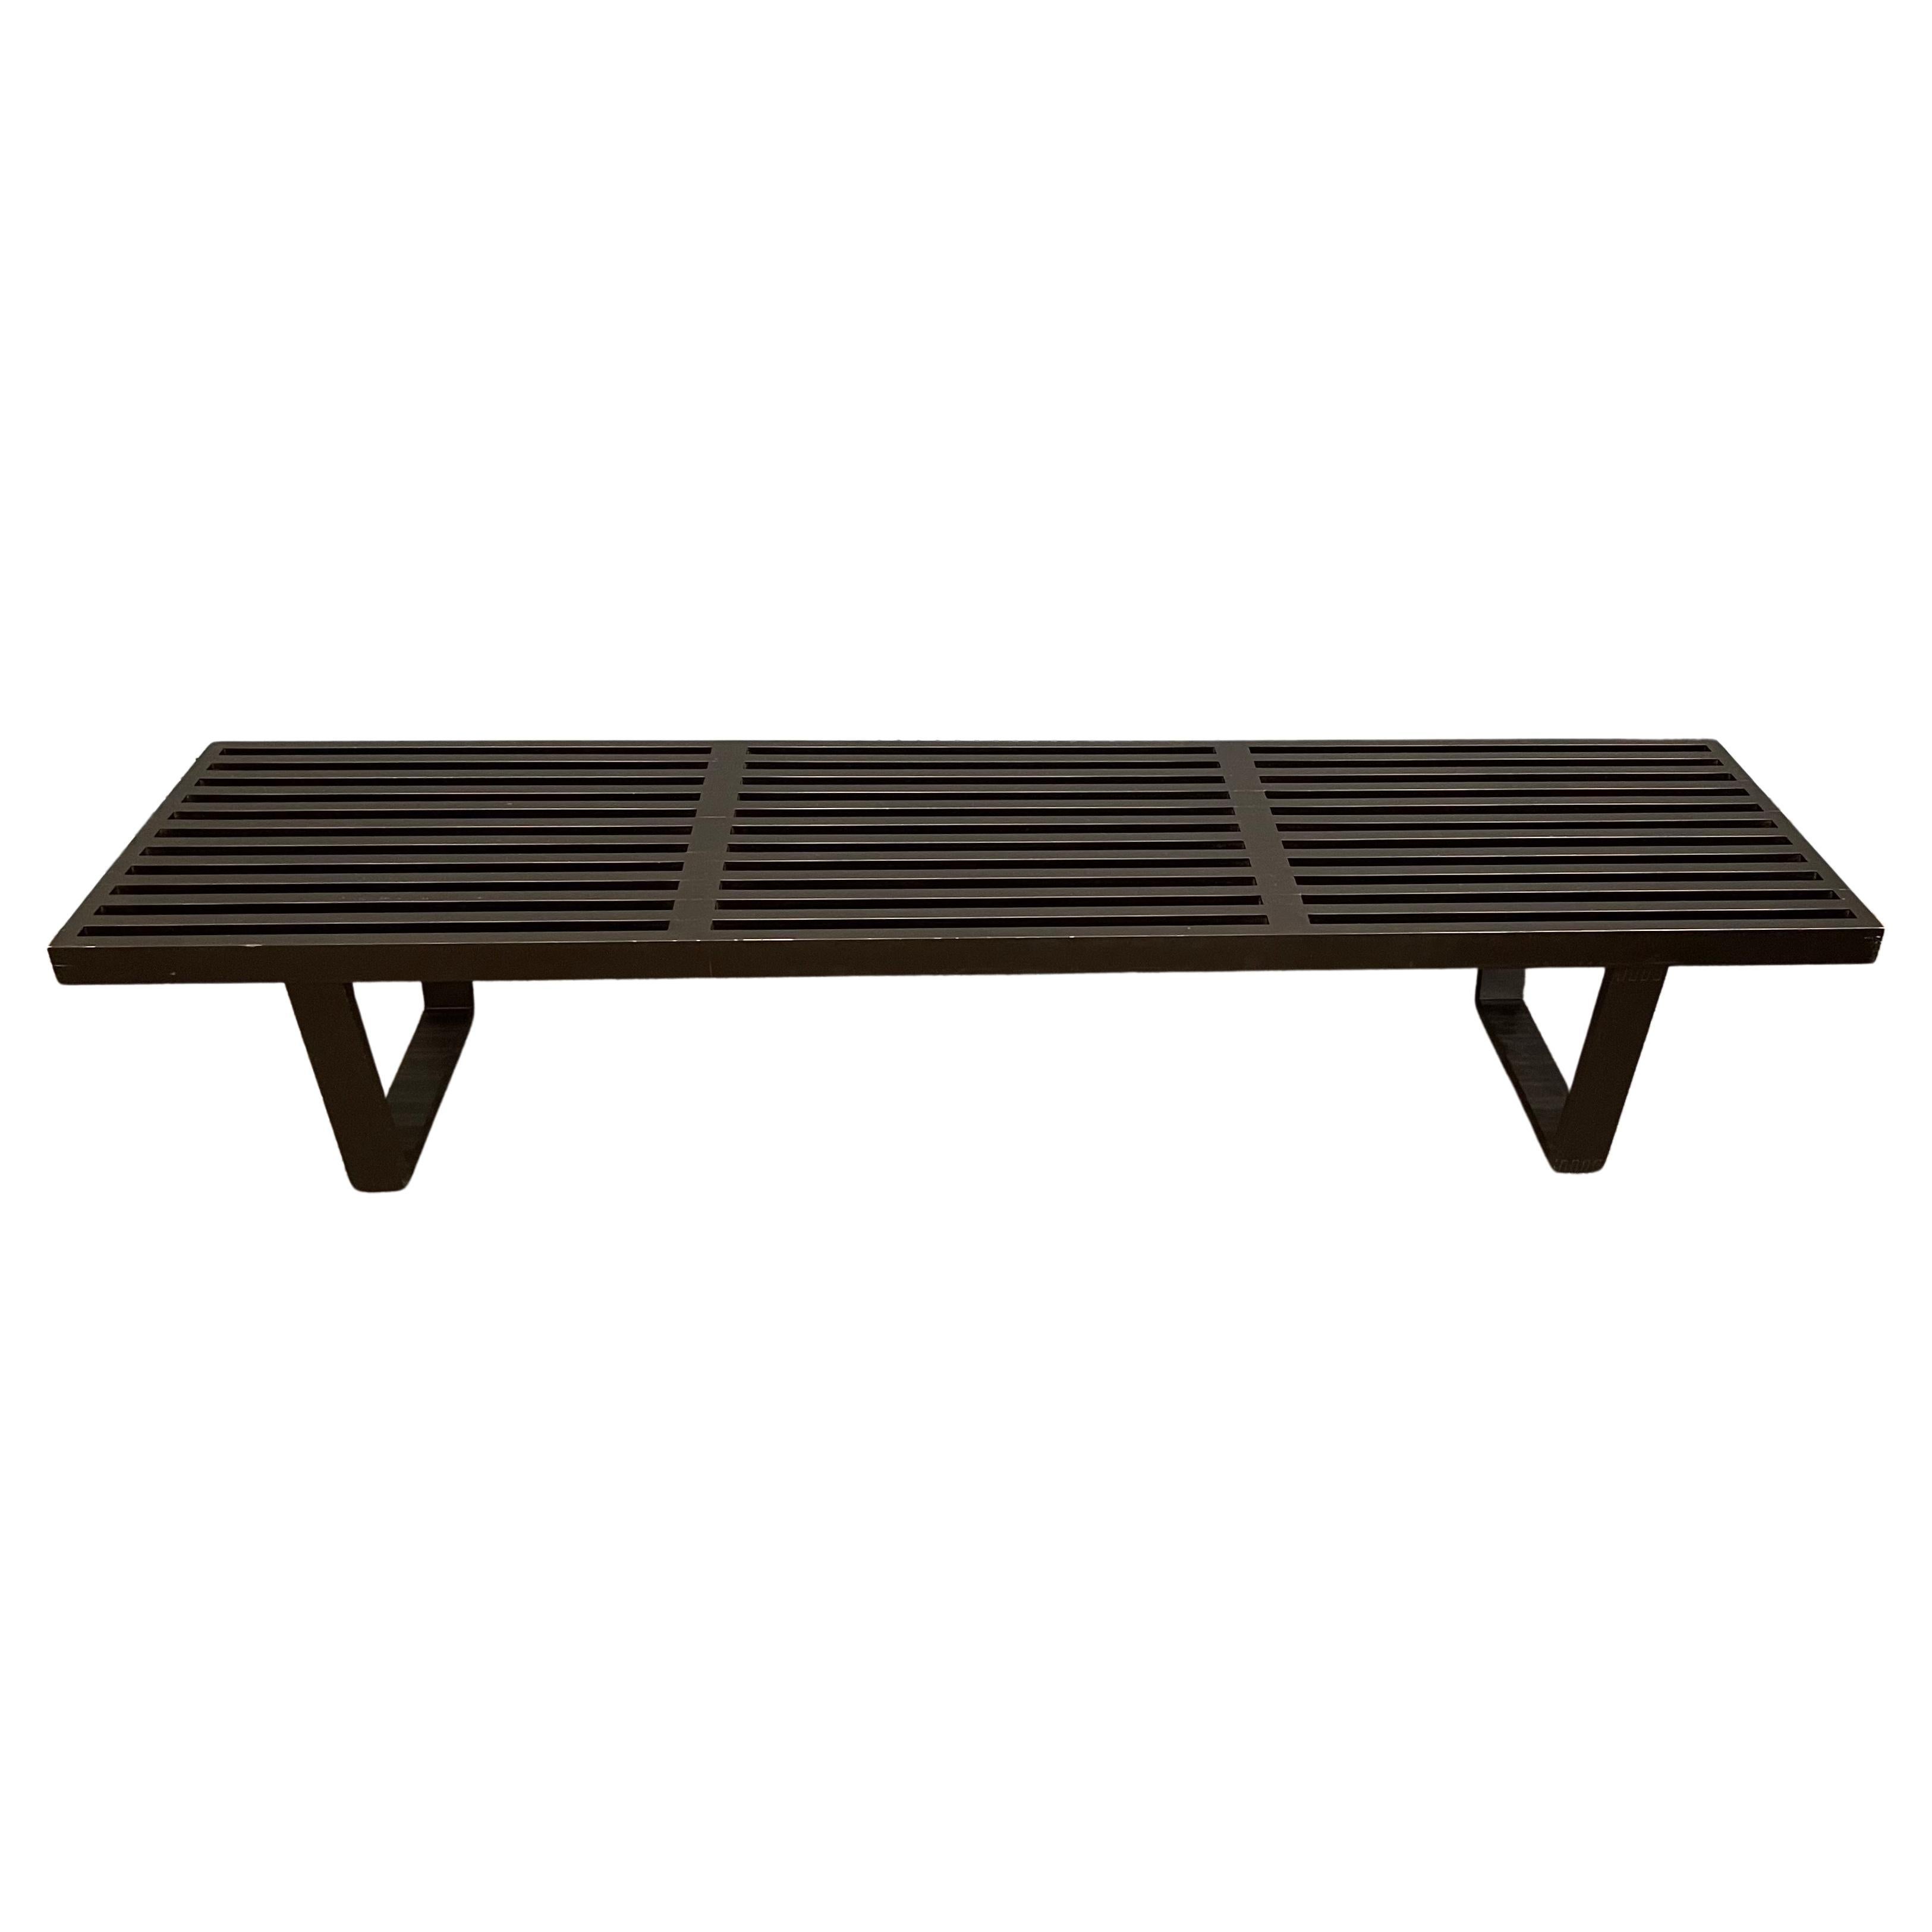 A true one-of-a-kind design! MCM large platform slat bench or coffee table by George Nelson for Herman Miller, circa 2004. The bench is in good condition with some knicks and dings due to use; the piece measures 72